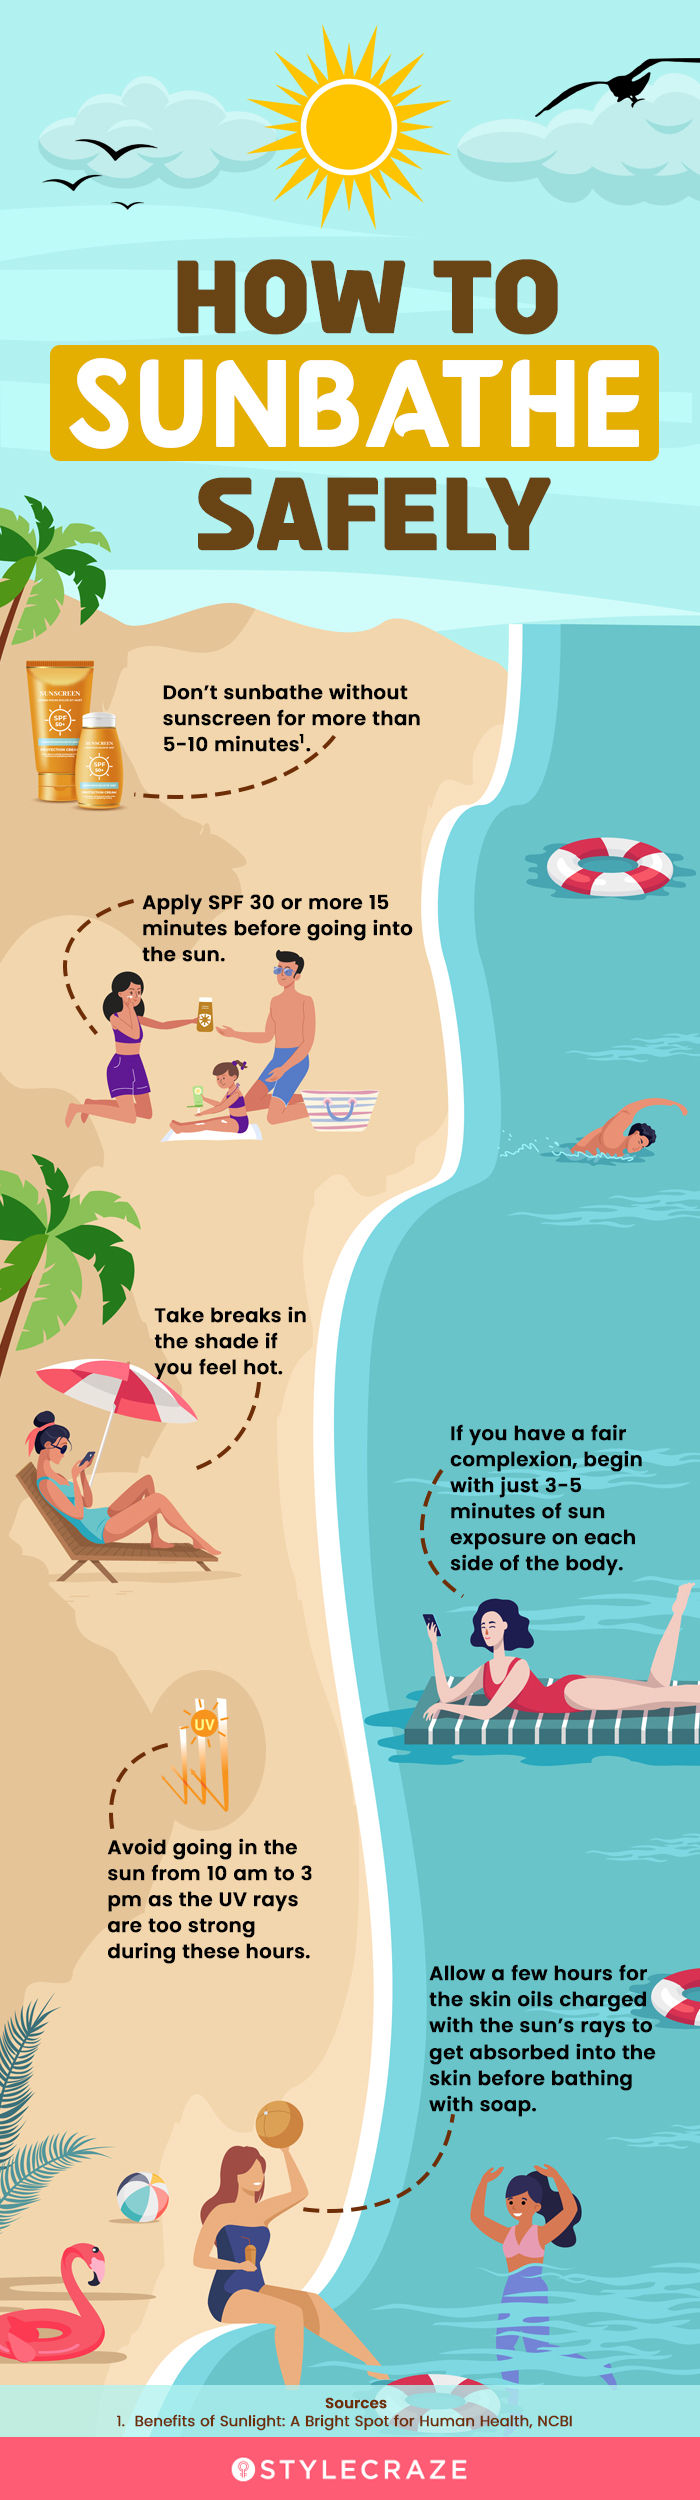 how to sunbathe safely (infographic)